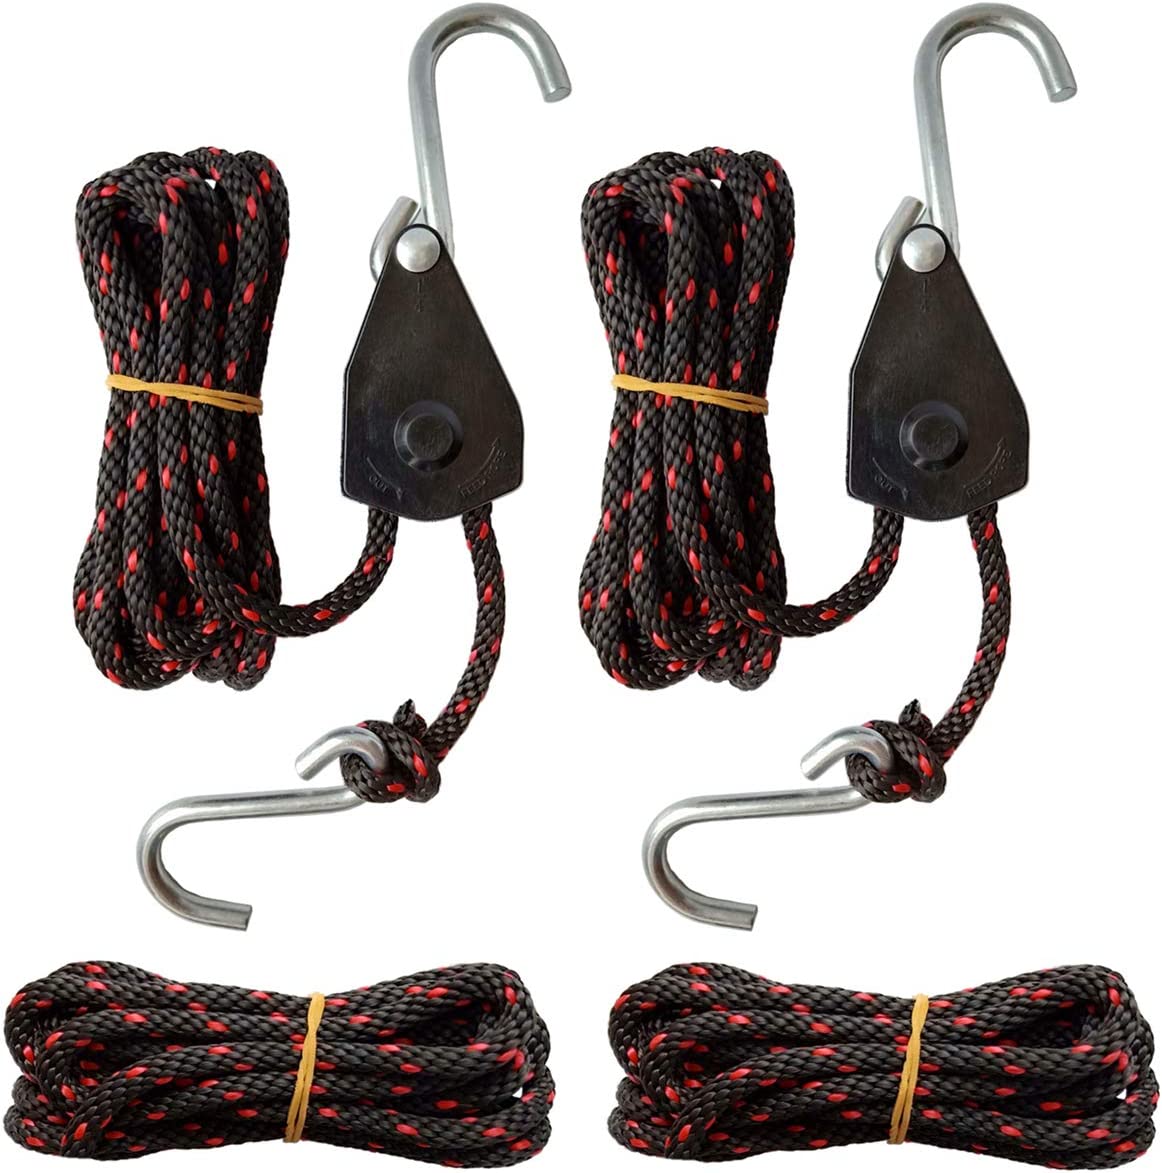 Sentry Ratchet Kayak and Canoe Bow and Stern Tie Downs 1/4" Grow Light Heavy Duty Adjustable Rope Hanger (2-Pack)